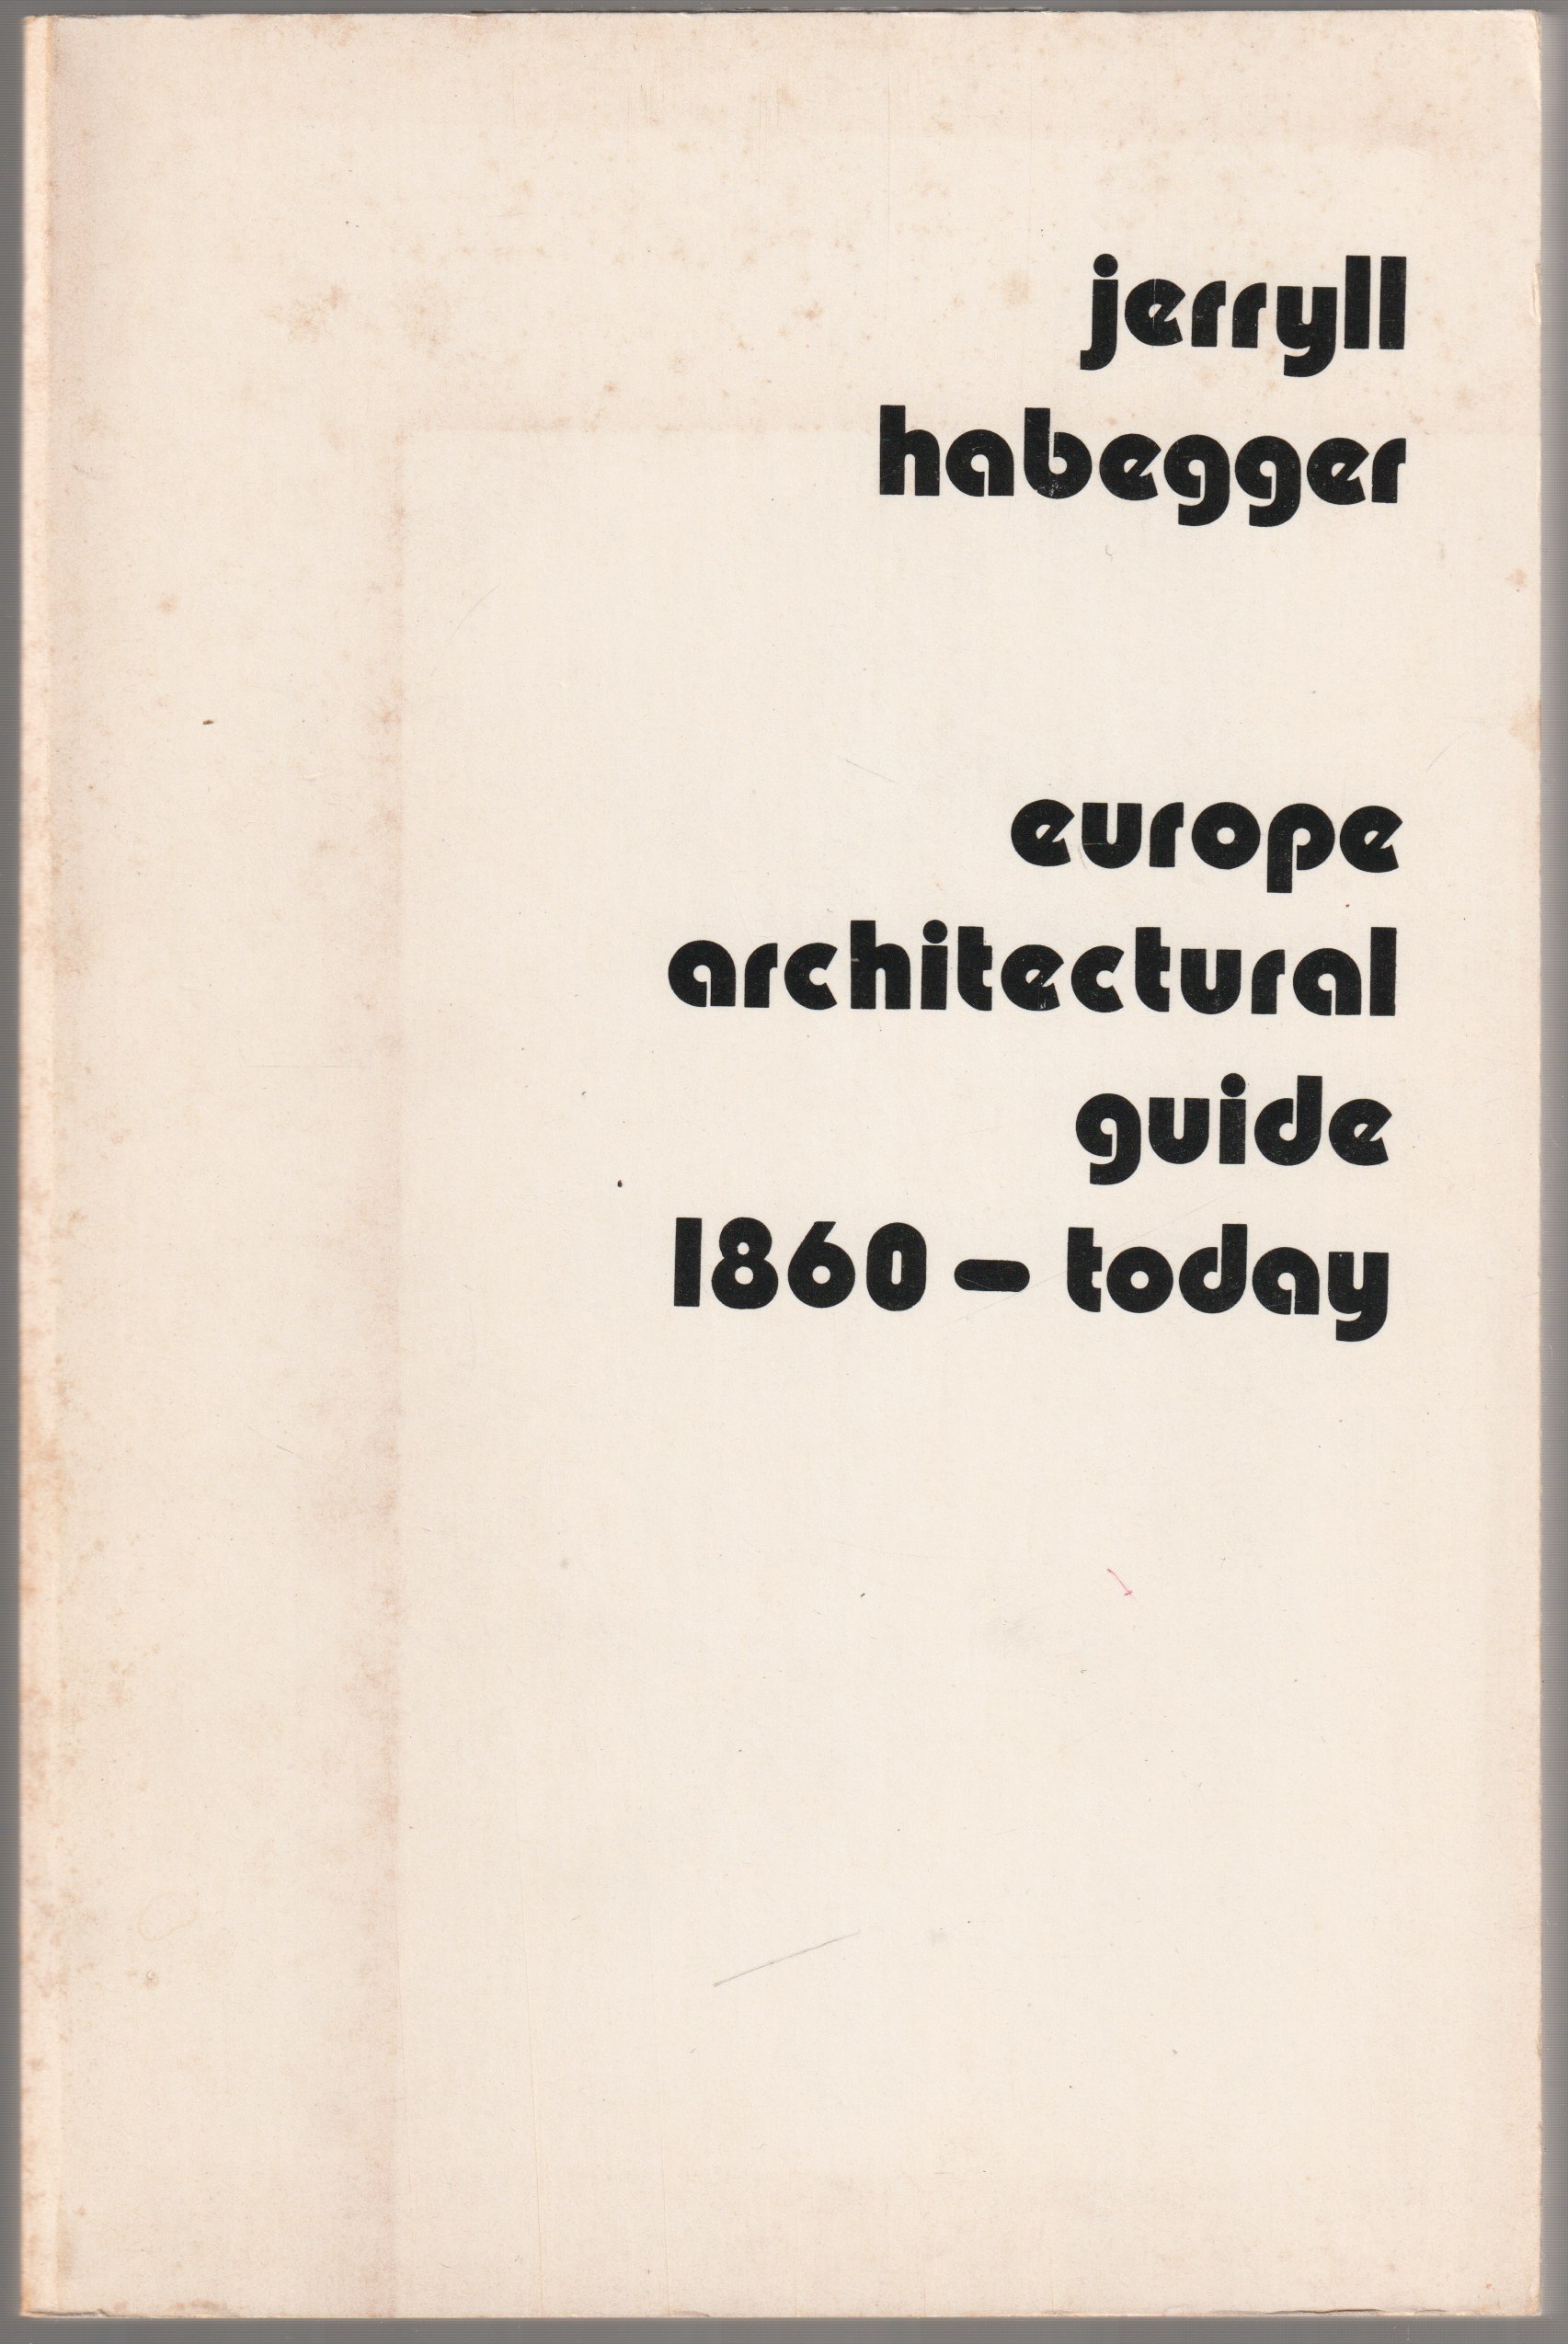 Europe architectural guide 1860-today /Jerryll Habegger.